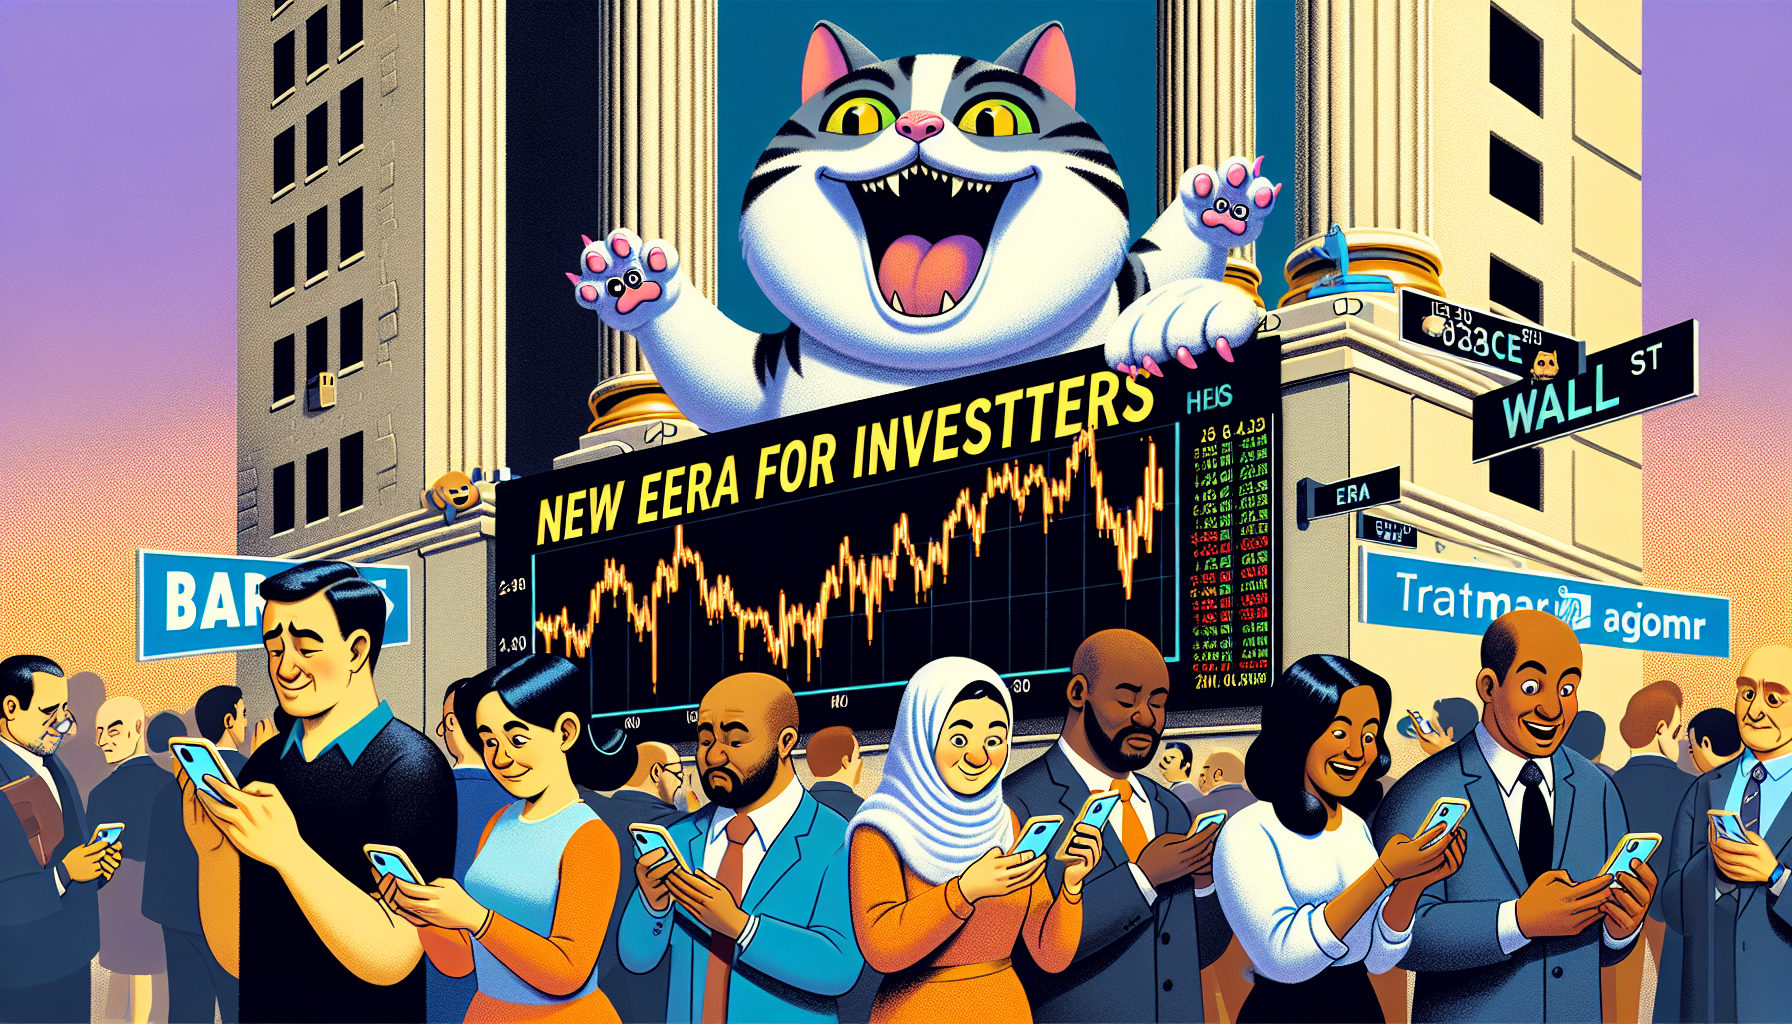 Influence of Roaring Kitty and meme stock trading: a new era for investors